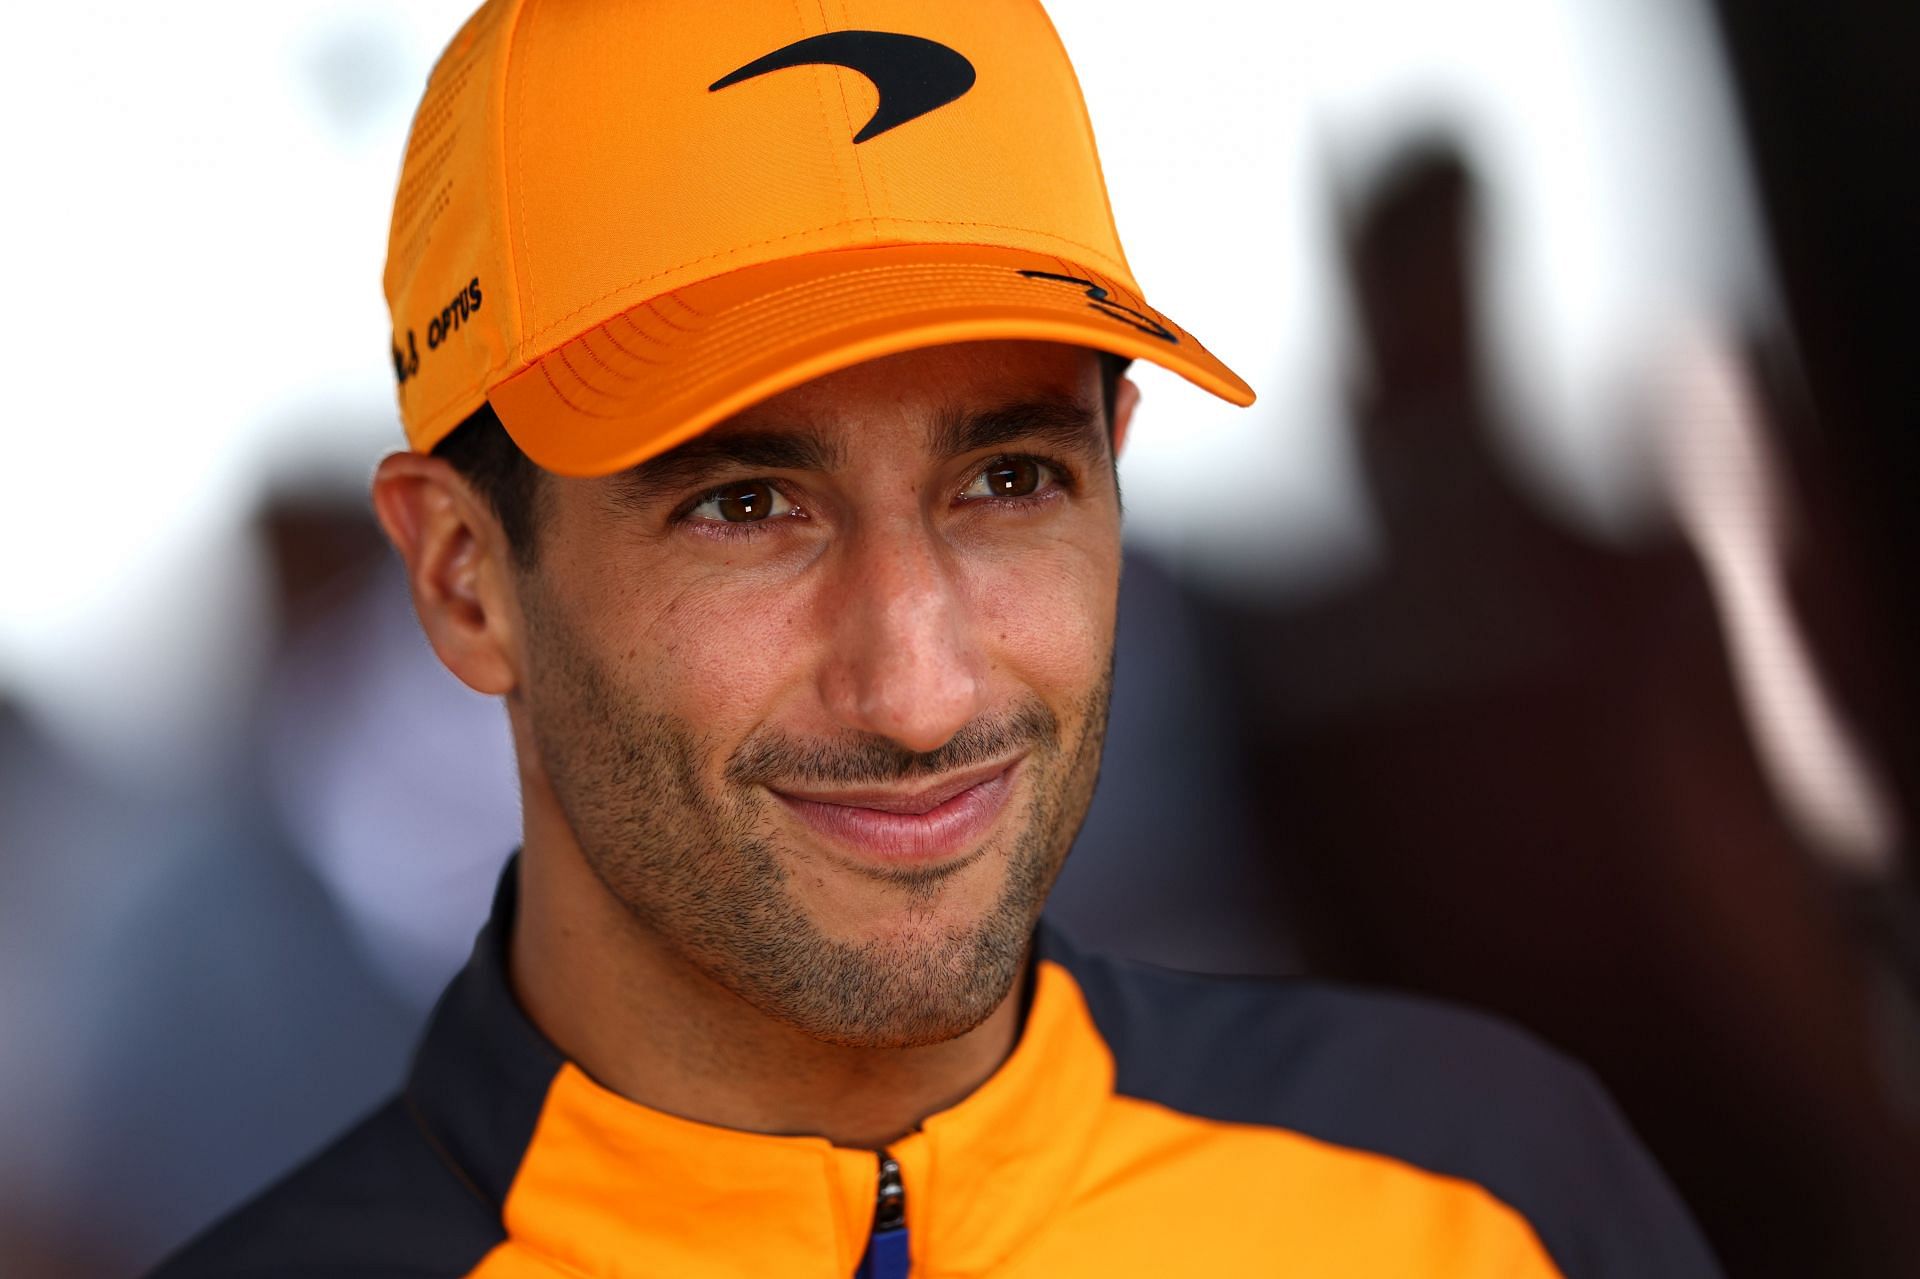 Daniel Ricciardo talks to the media in the paddock prior to practice ahead of the F1 Grand Prix of Canada at Circuit Gilles Villeneuve on June 17, 2022 in Montreal, Quebec. (Photo by Clive Rose/Getty Images)